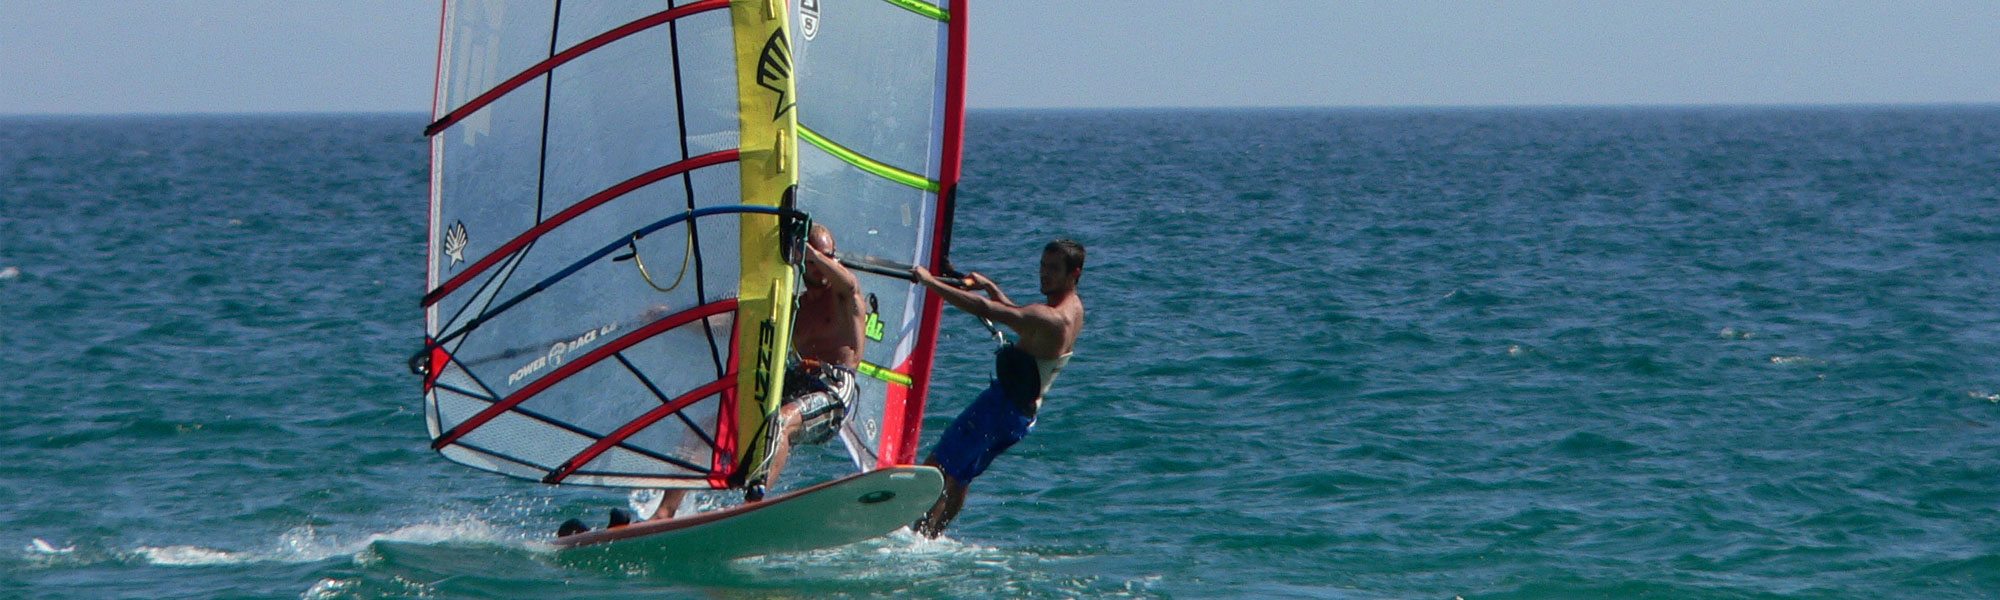 Windsurfing in Asia